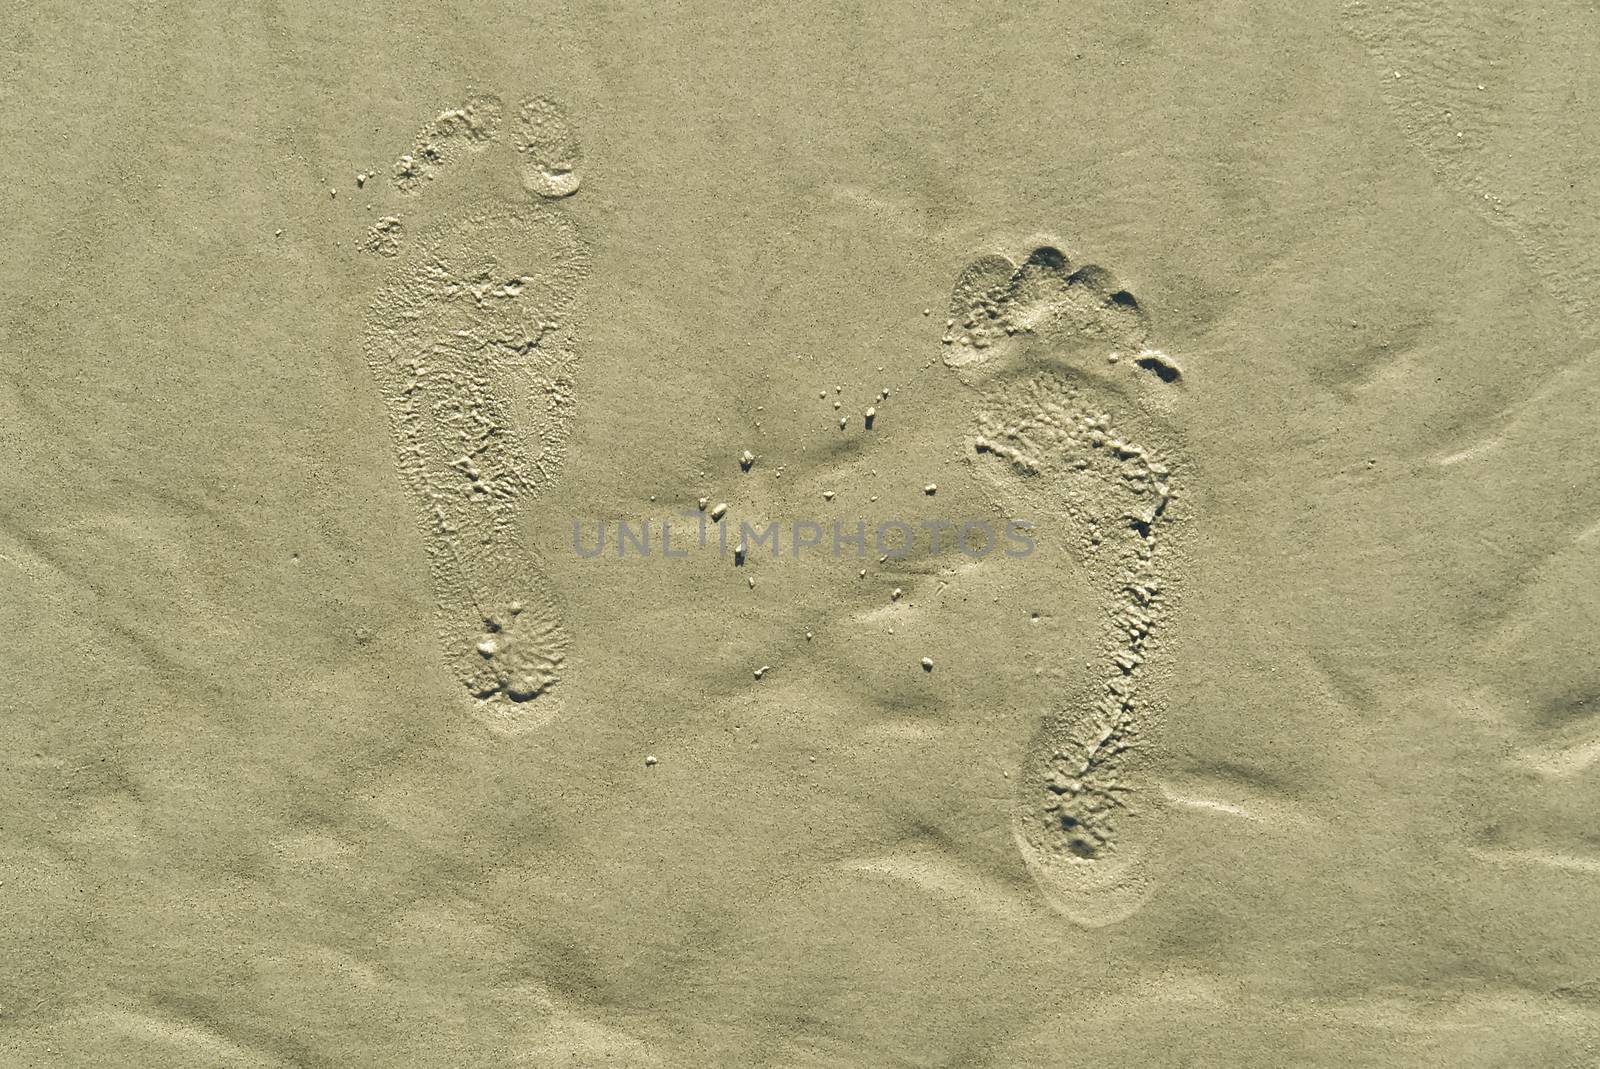 footsteps on beach in sandy. Footsteps on the coral sandy beach. footprints in the sand. by PhotoTime